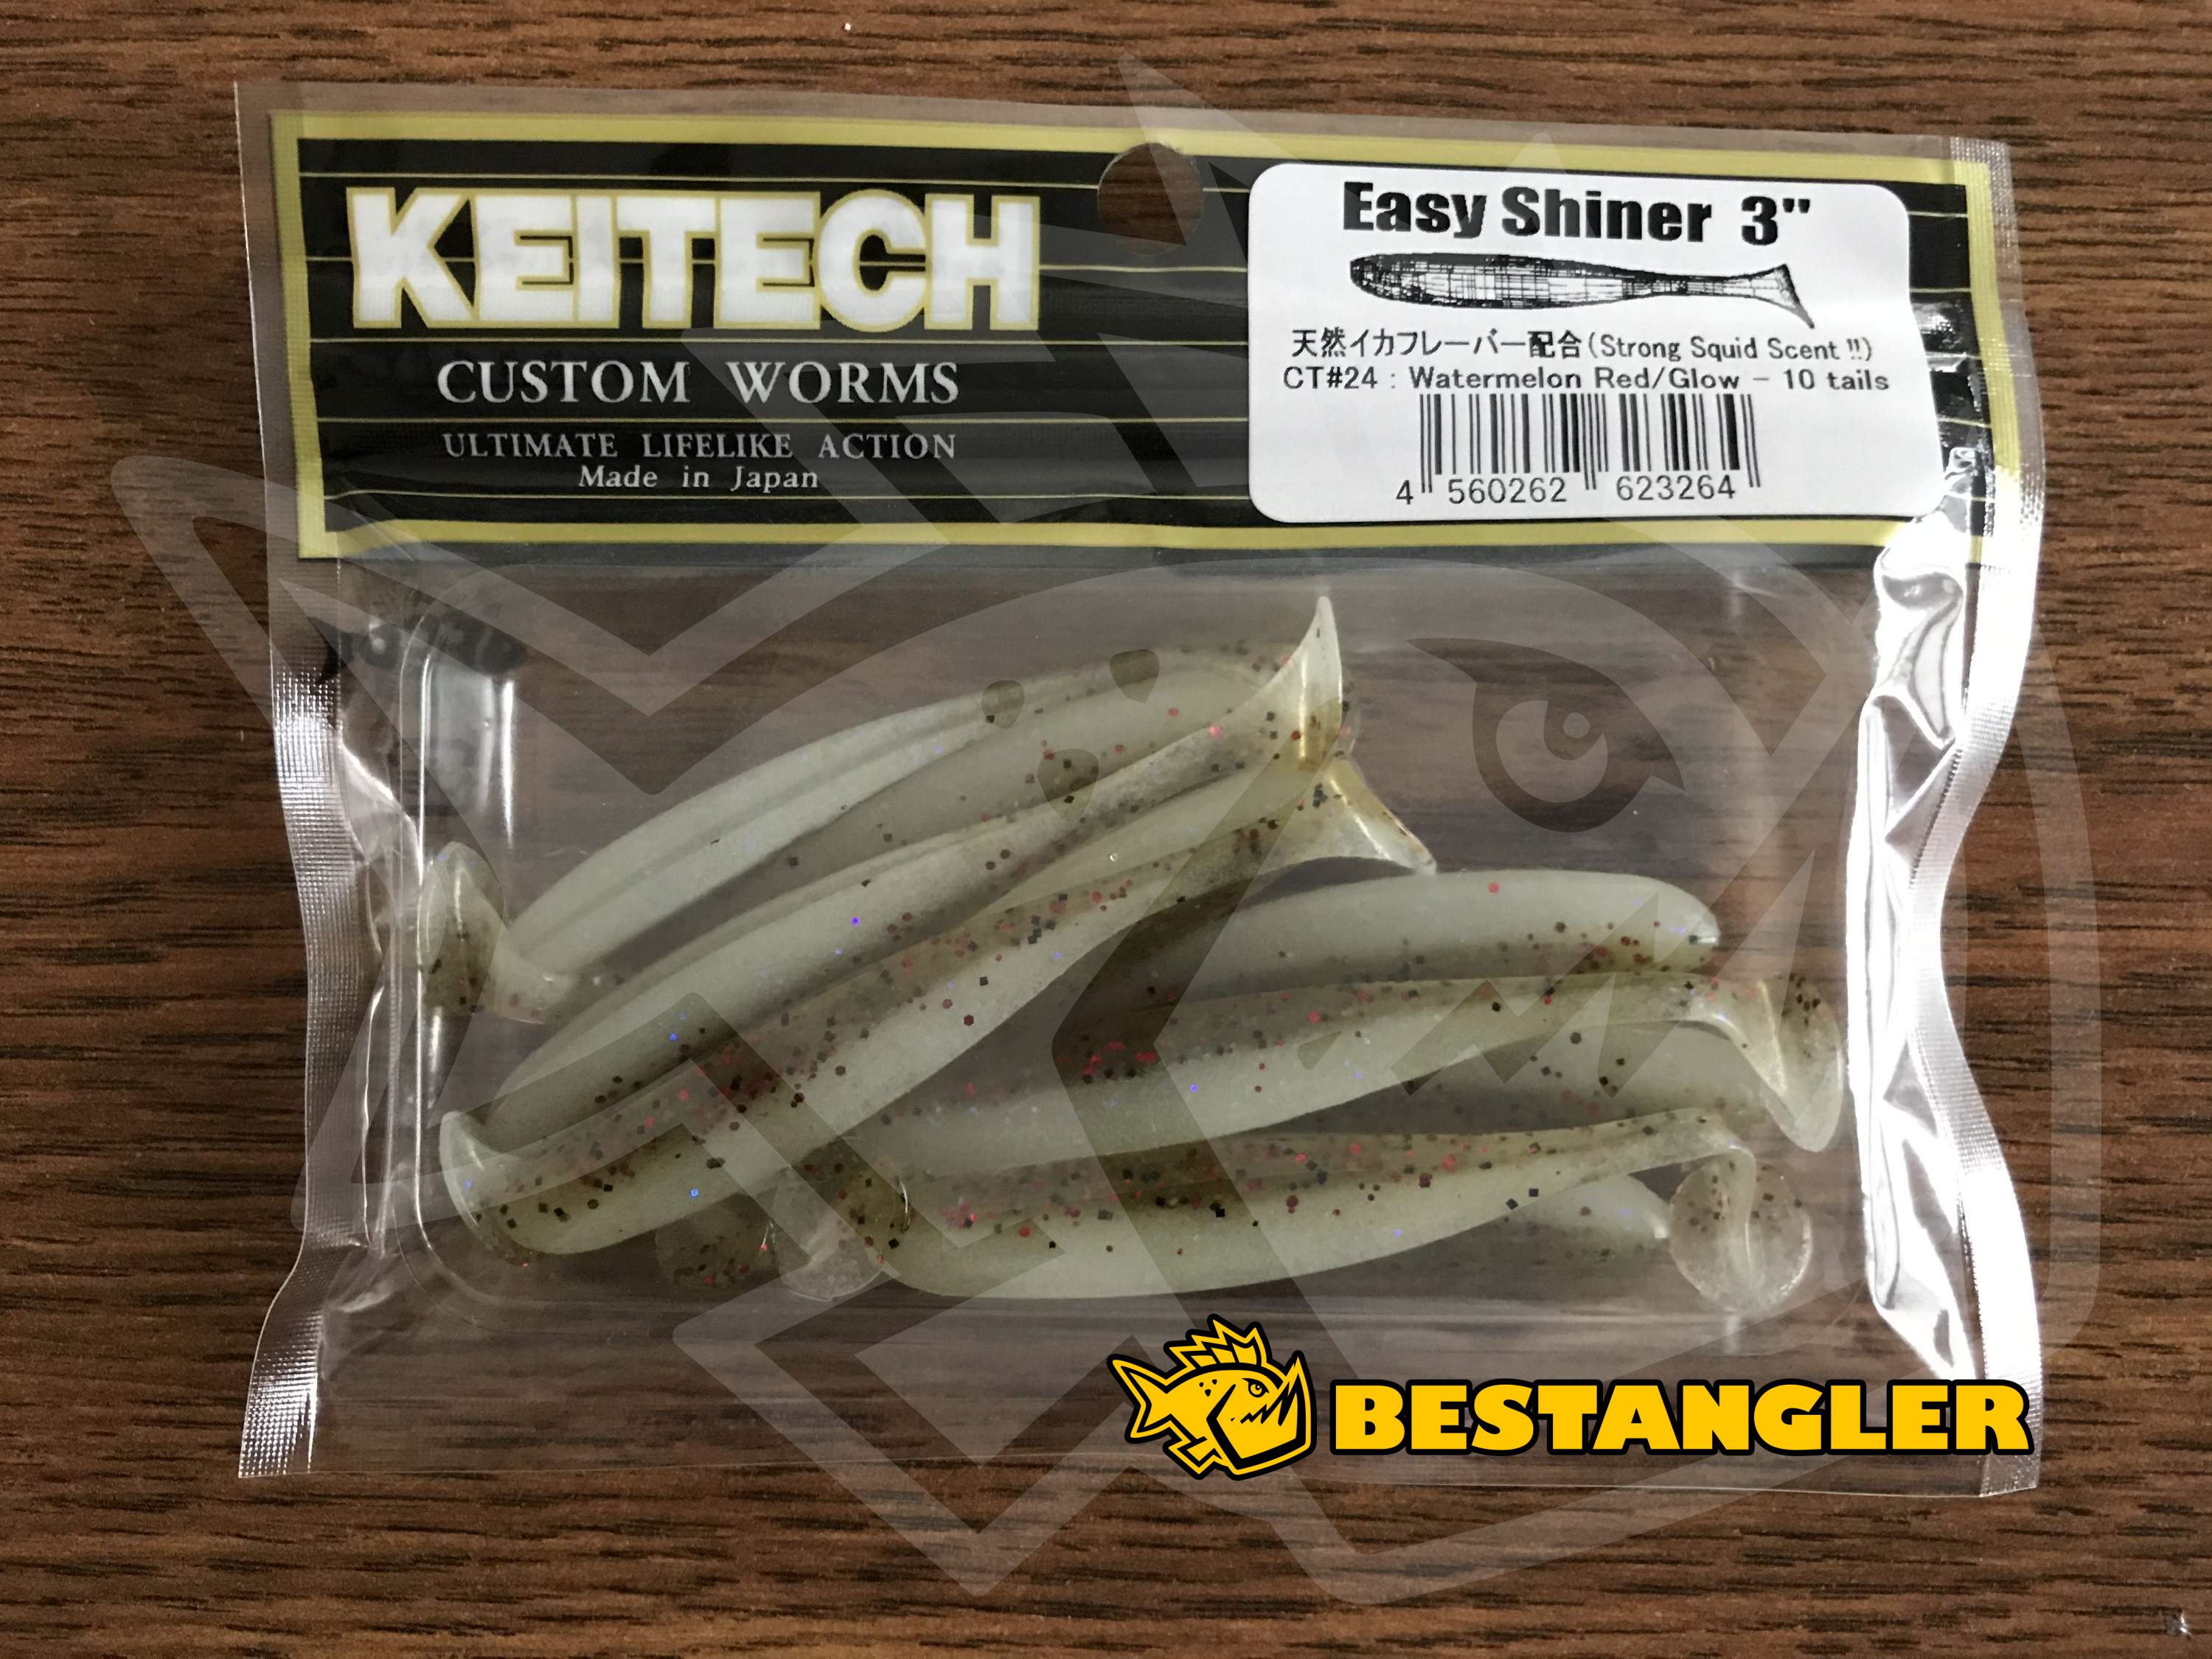 Keitech Easy Shiner 3 Watermelon Red / Glow